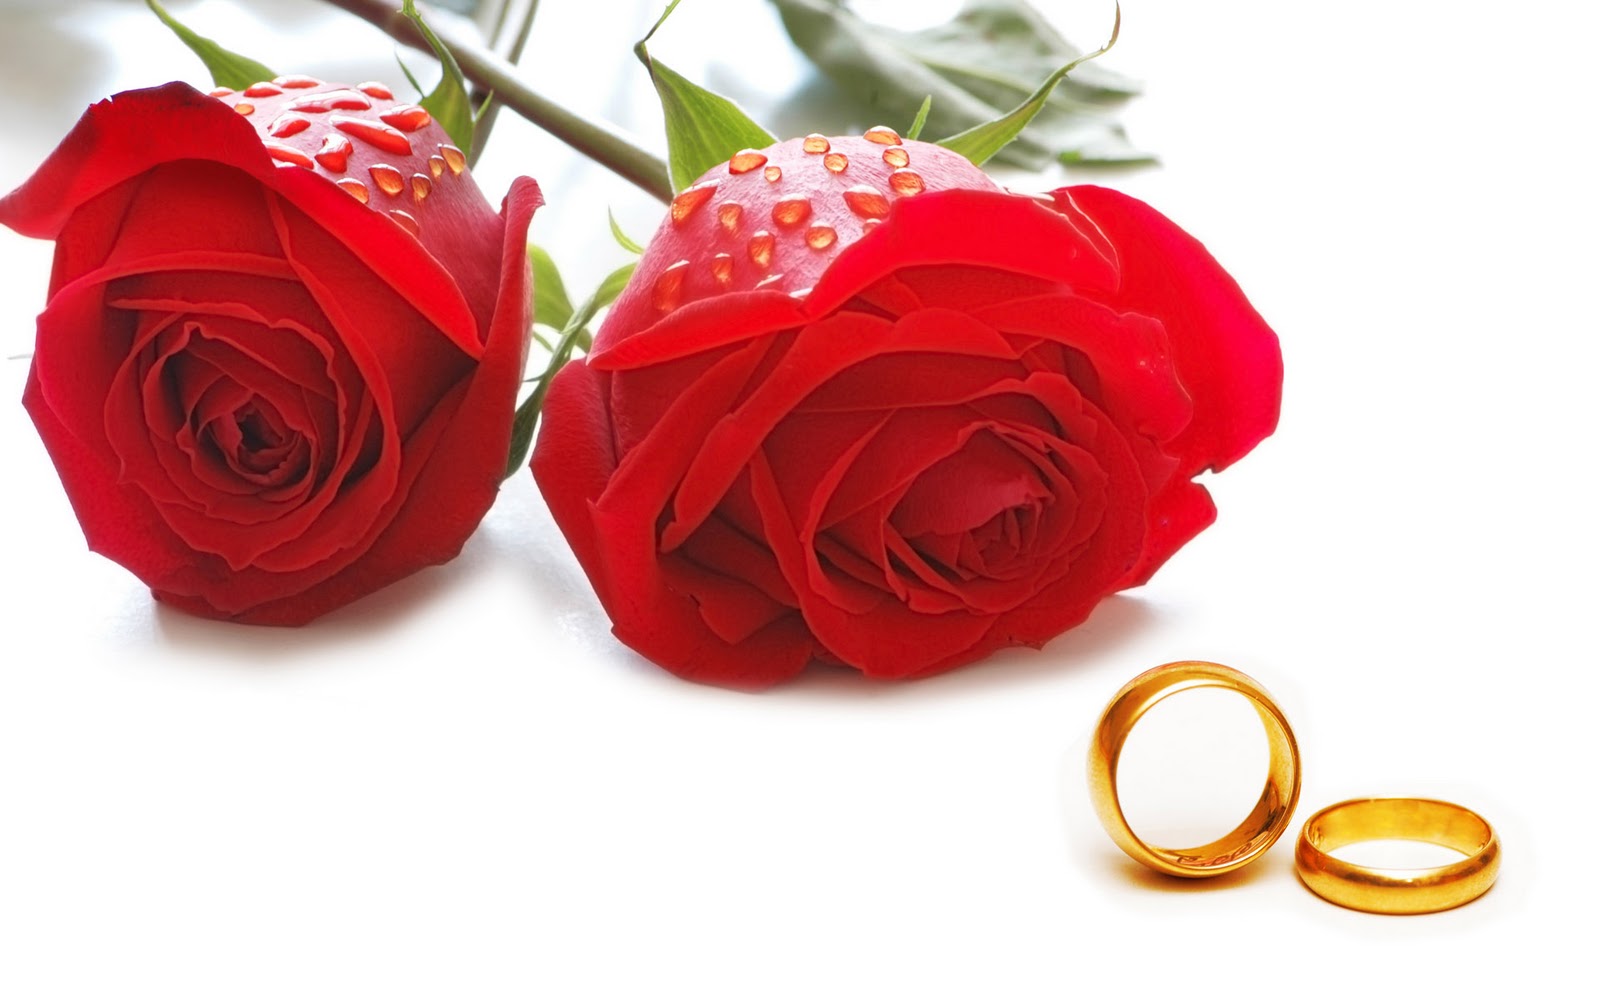 Rose Day 2019: Wishes, Wallpapers, Images, Quotes & Greeting Cards to send  to your loved ones